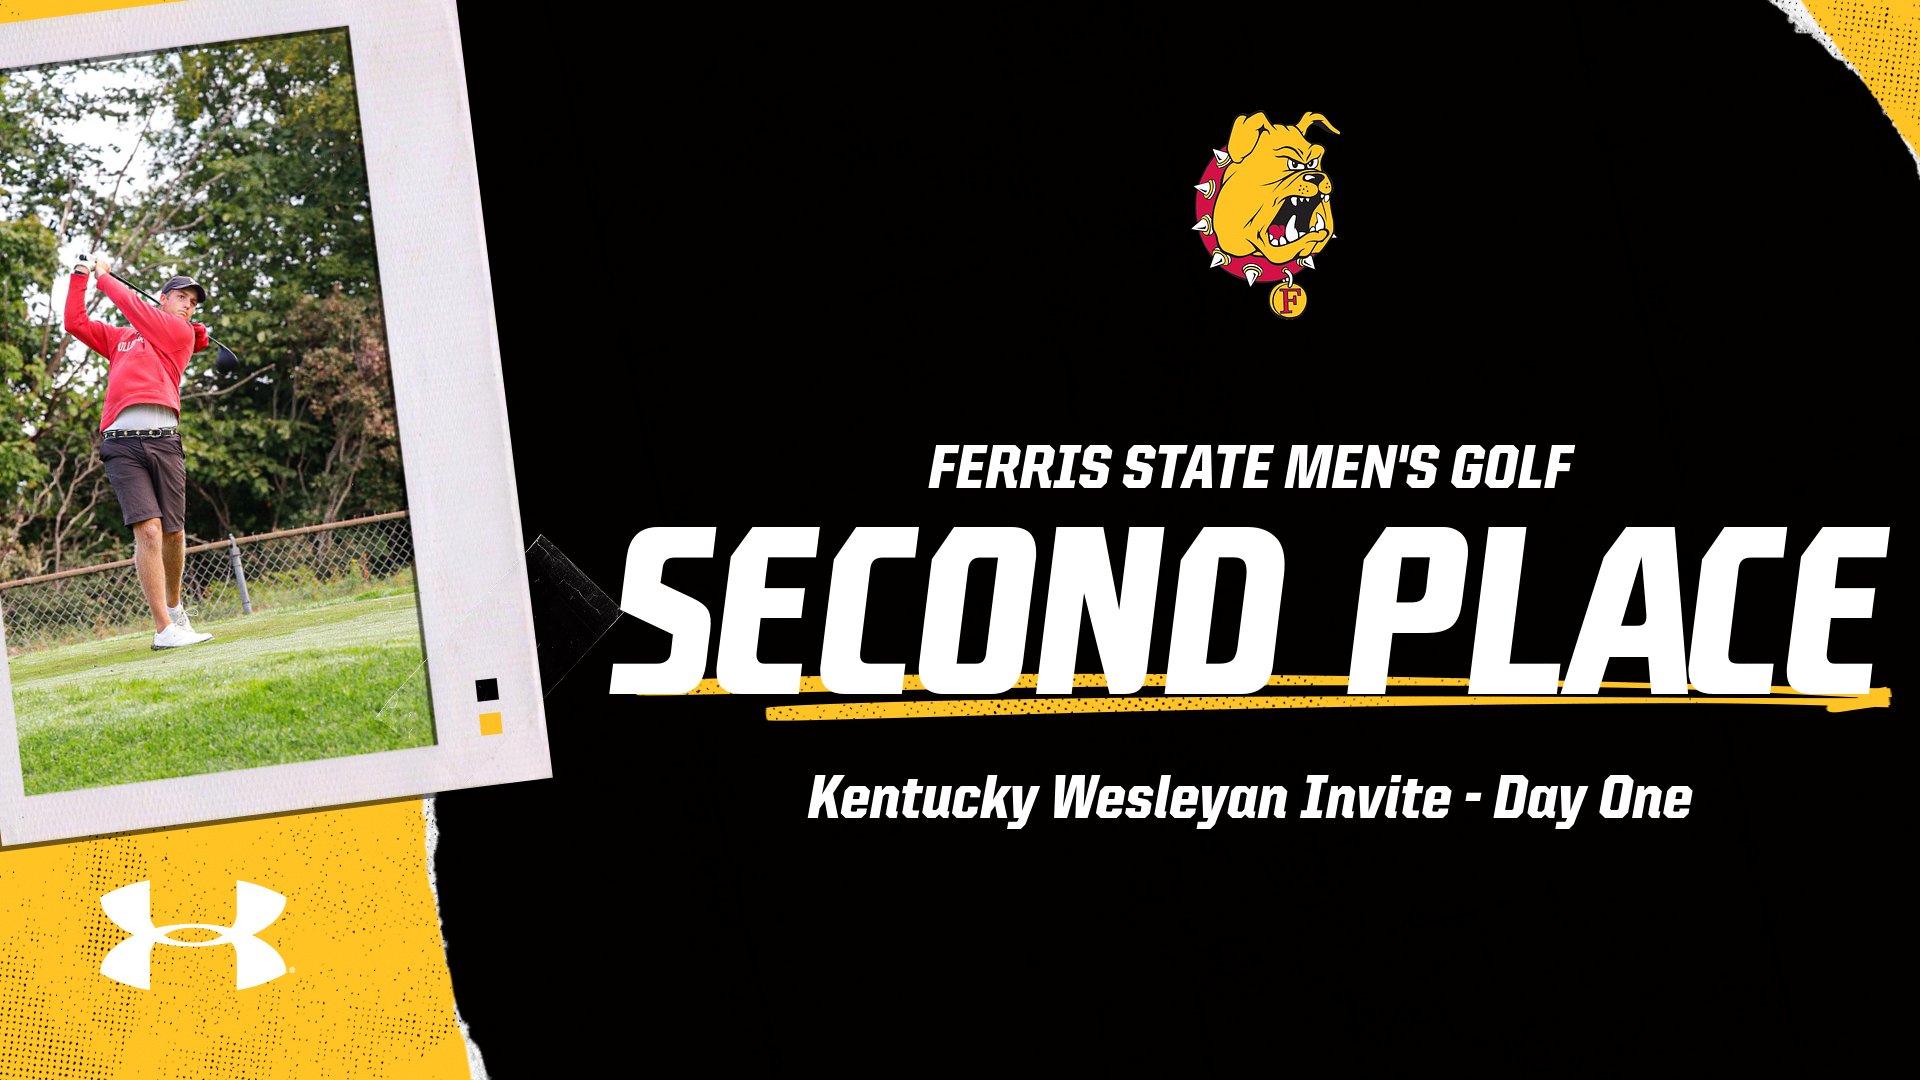 Ferris State Men's Golf Starts In Second Place At Kentucky Wesleyan Invite